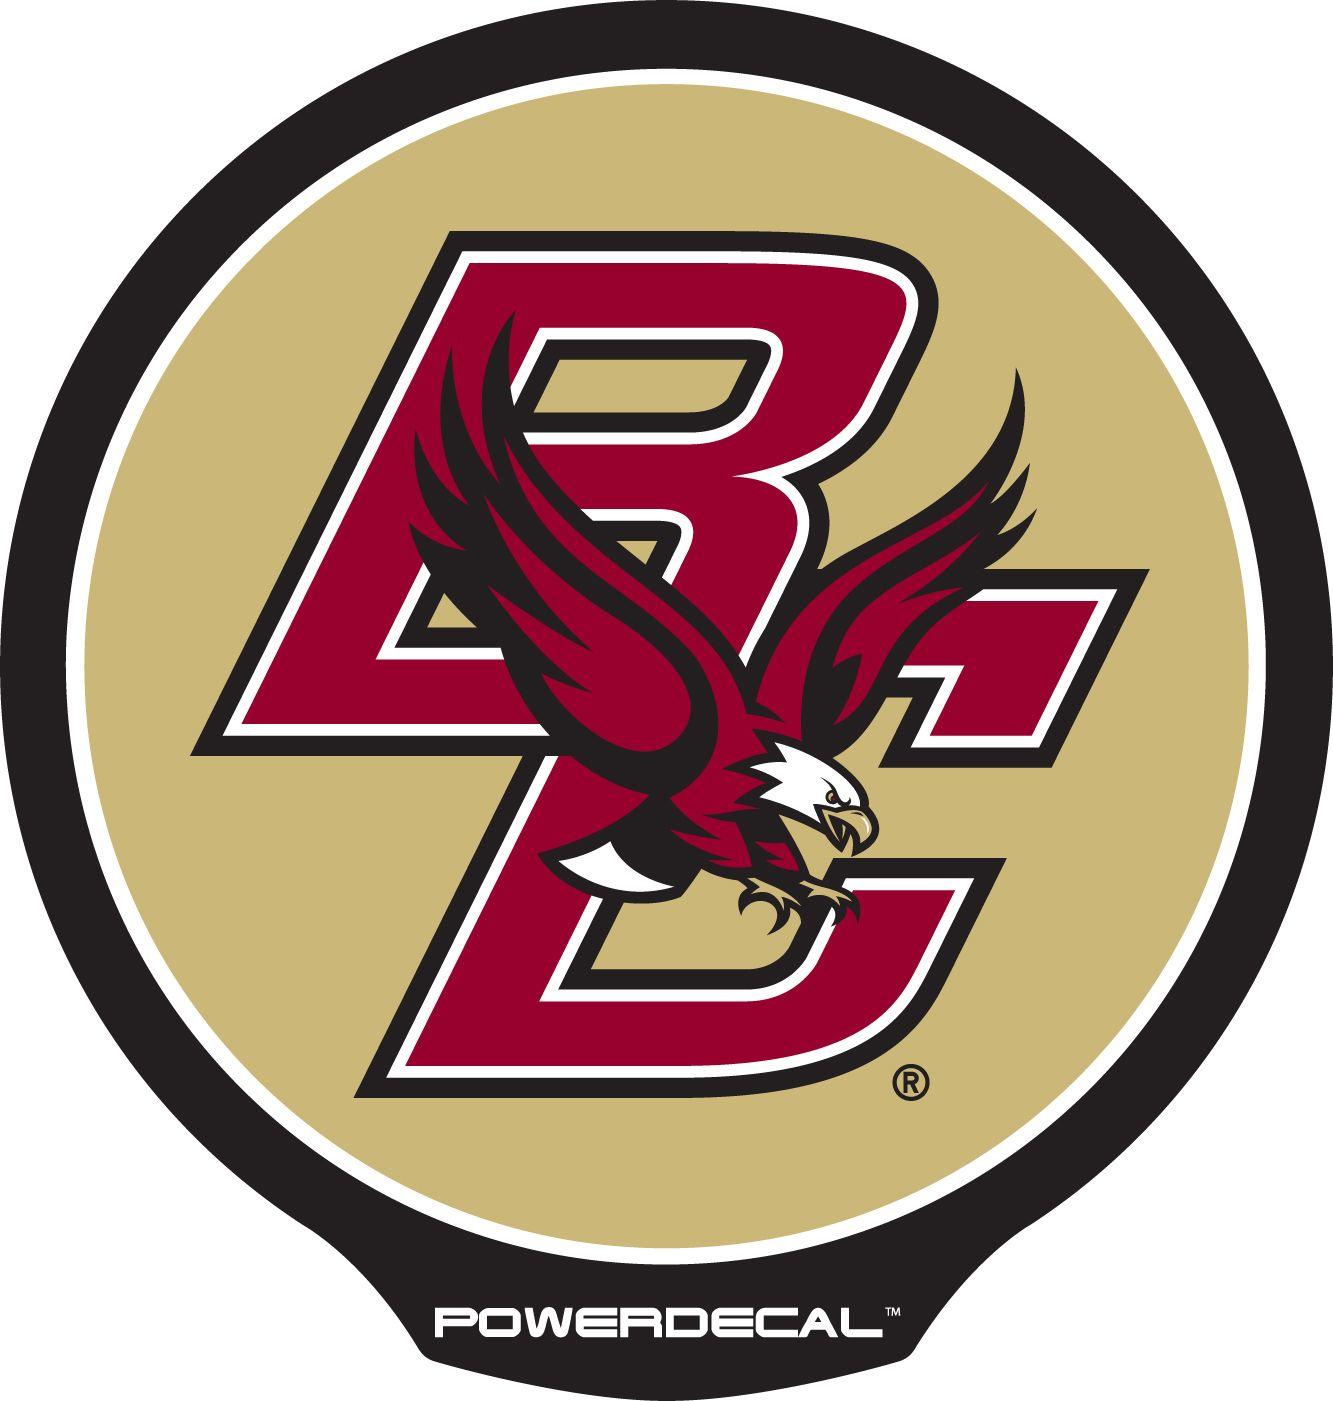 Black and Red Eagles Logo - PowerDecal PWR240201 Decal College Boston College Eagles Logo